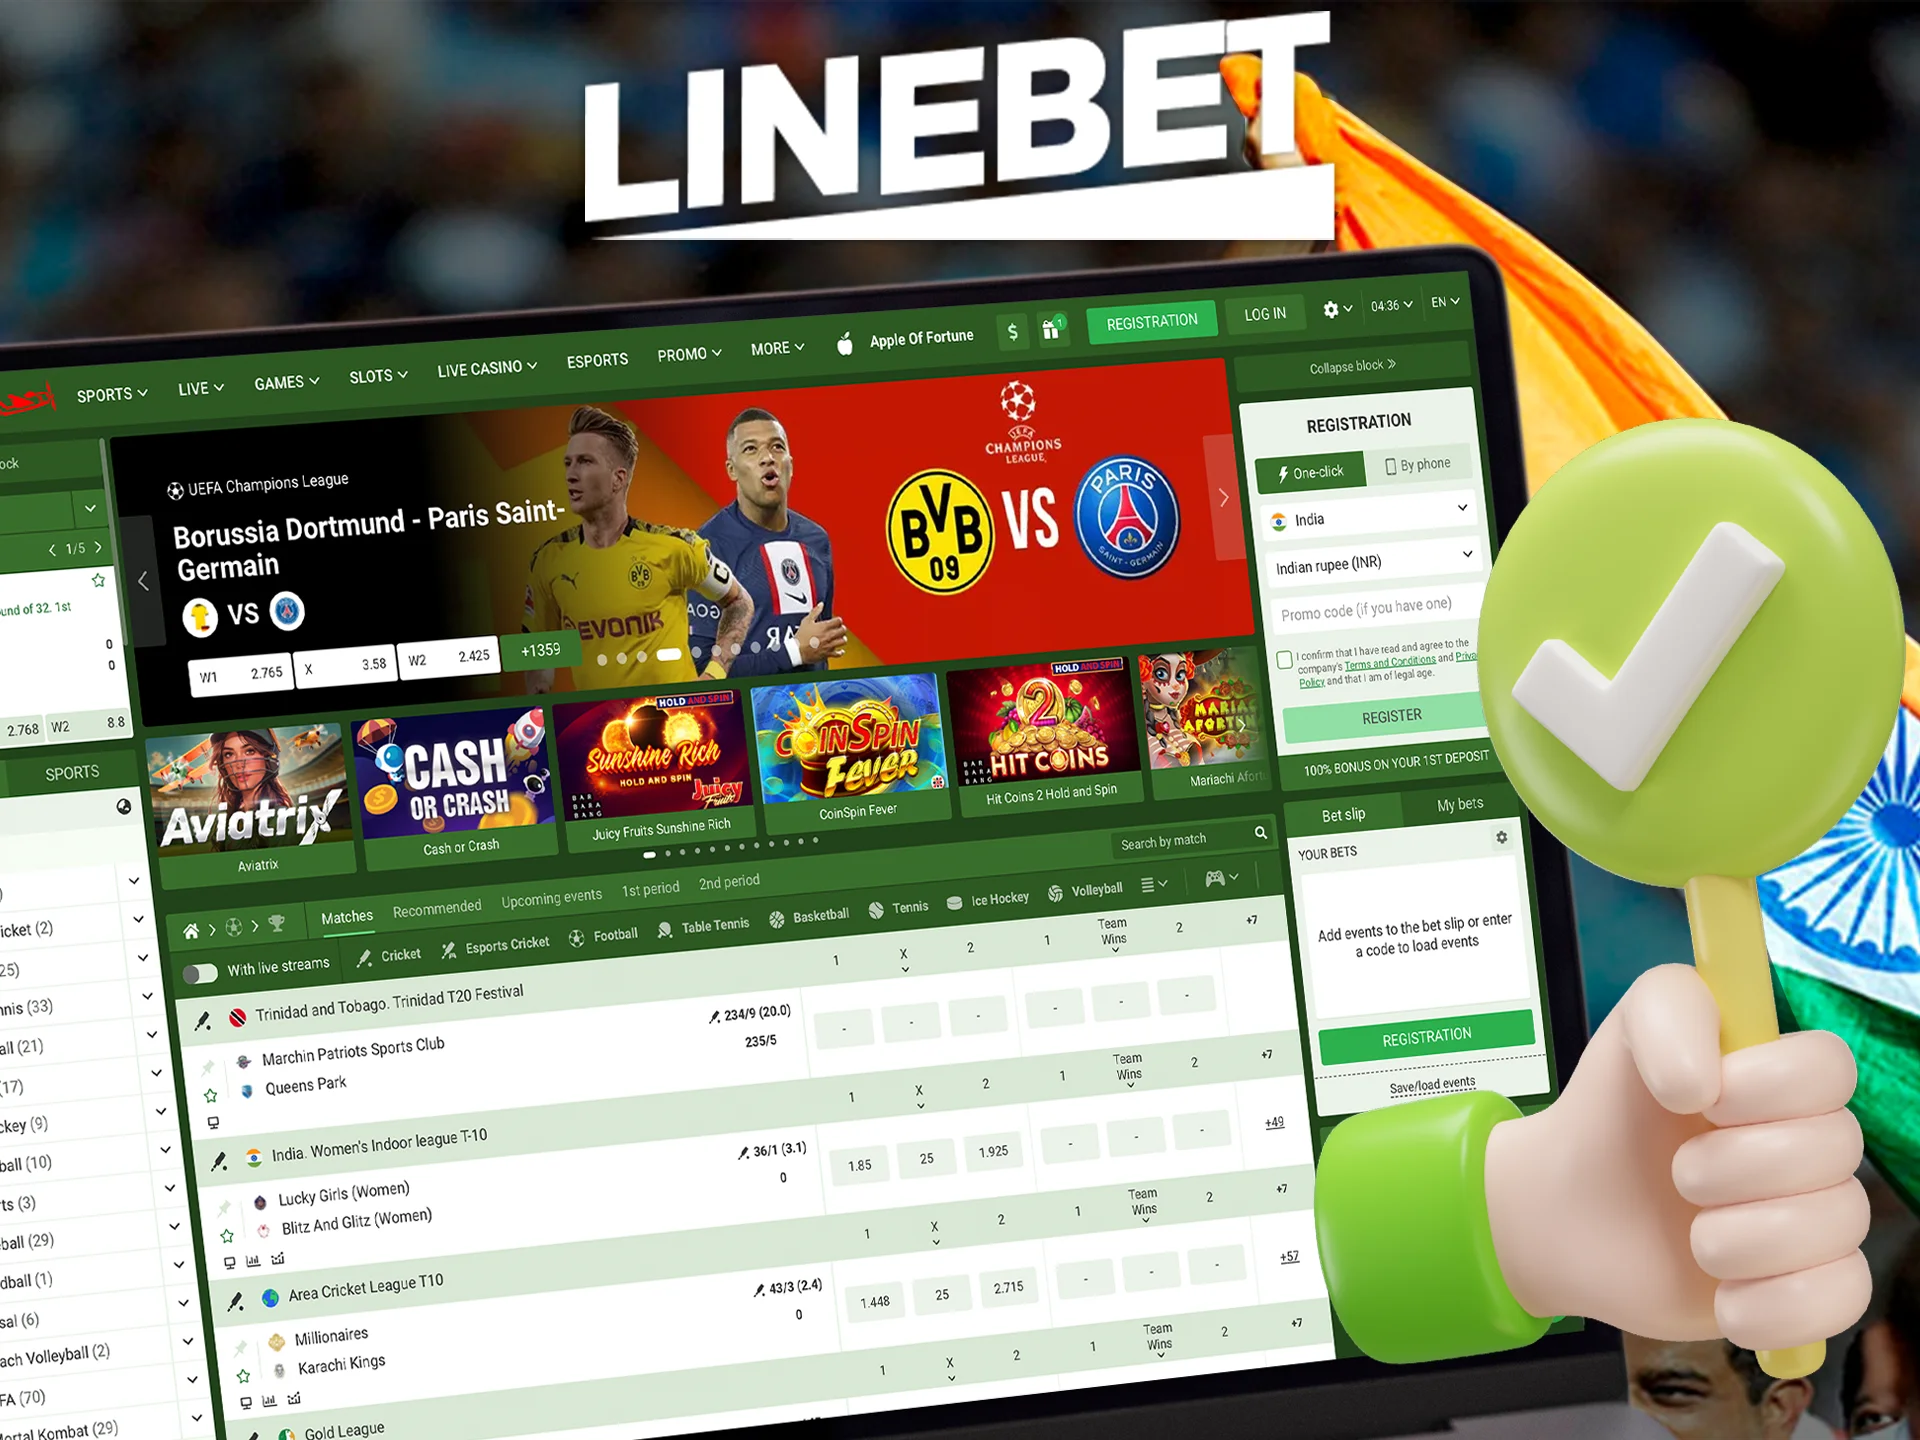 Read about the legality of Linebet casino.